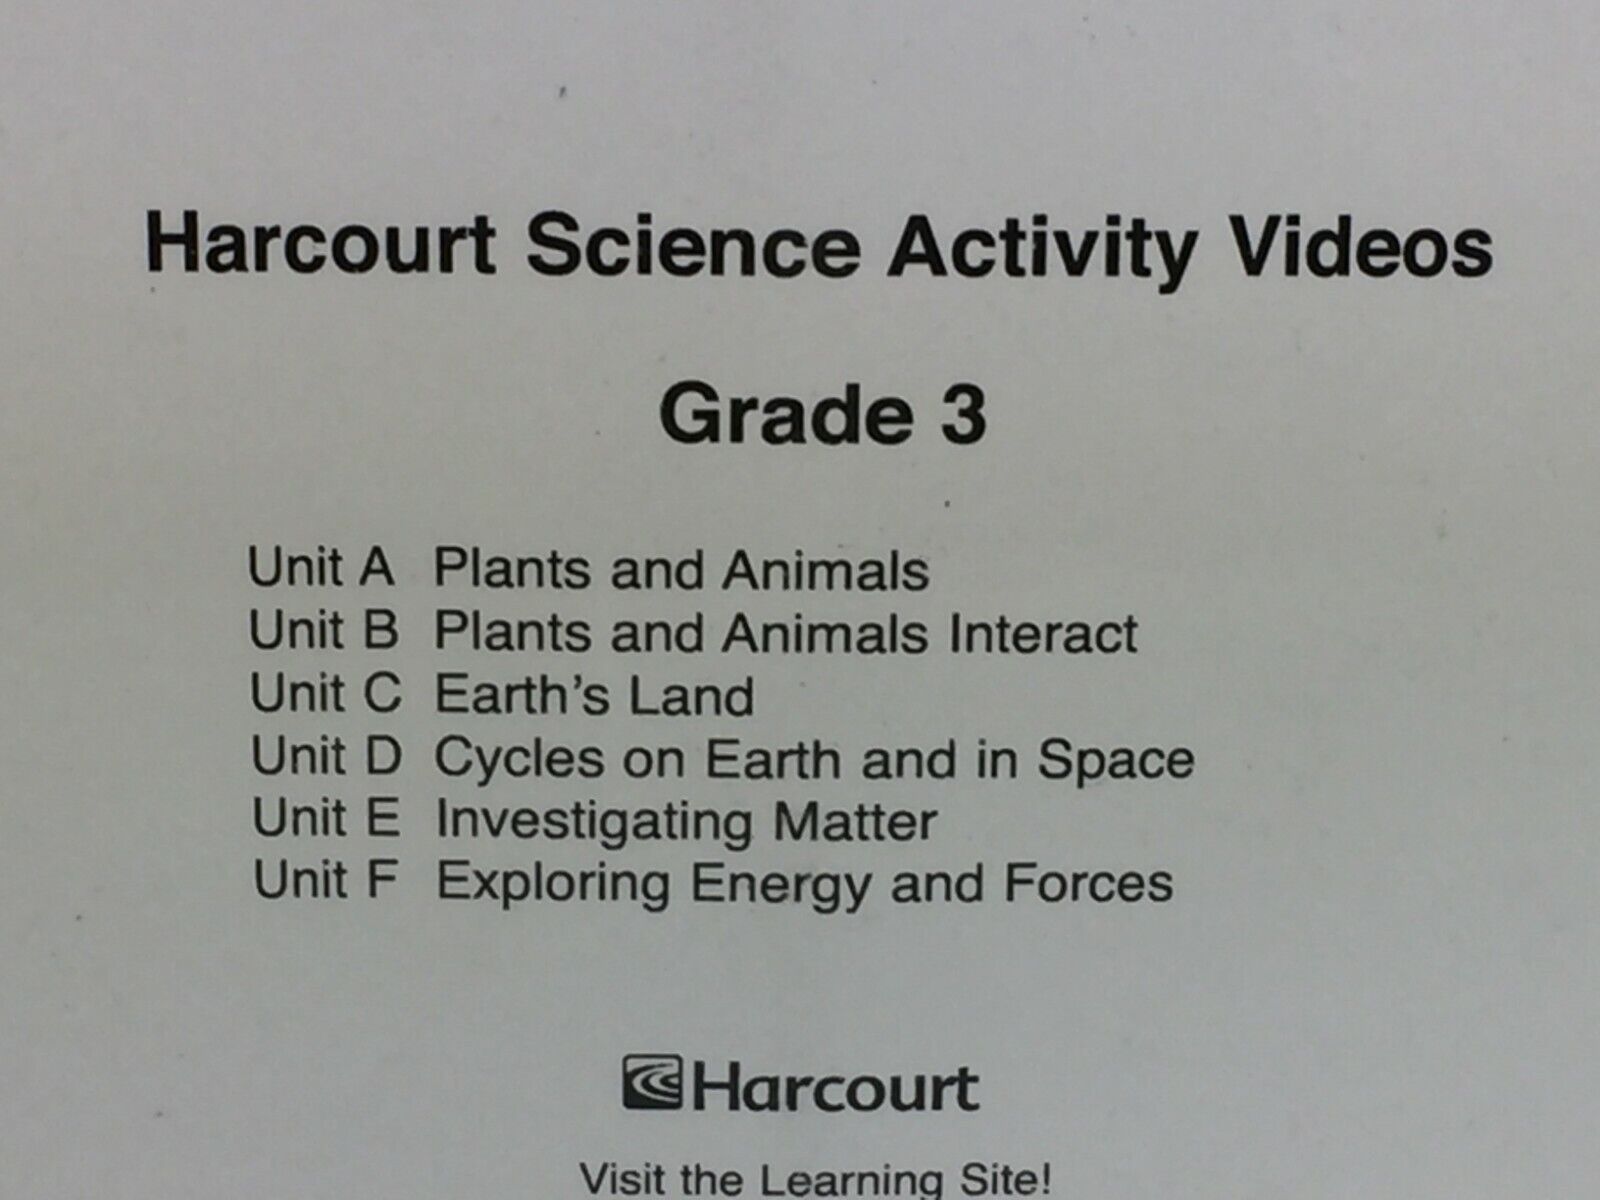 Harcourt Science Activity Videos Grade 3 Units A-F  Factory Sealed   6 VHS Tapes